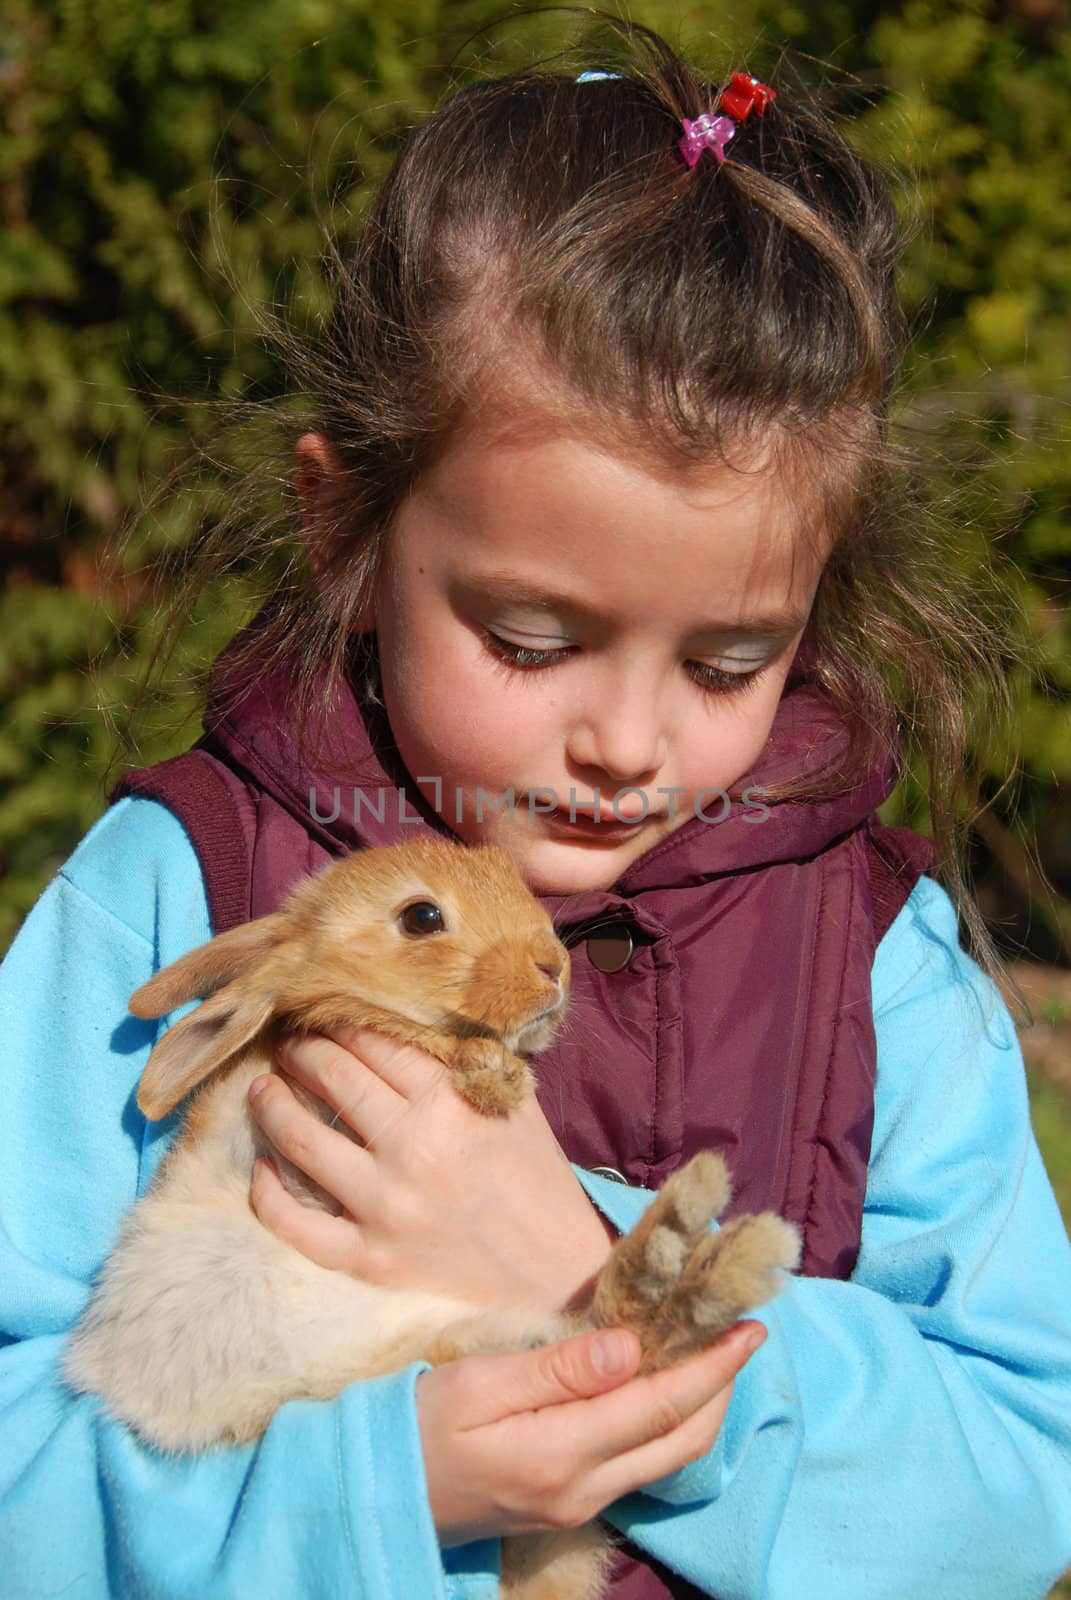 little girl and bunny by cynoclub